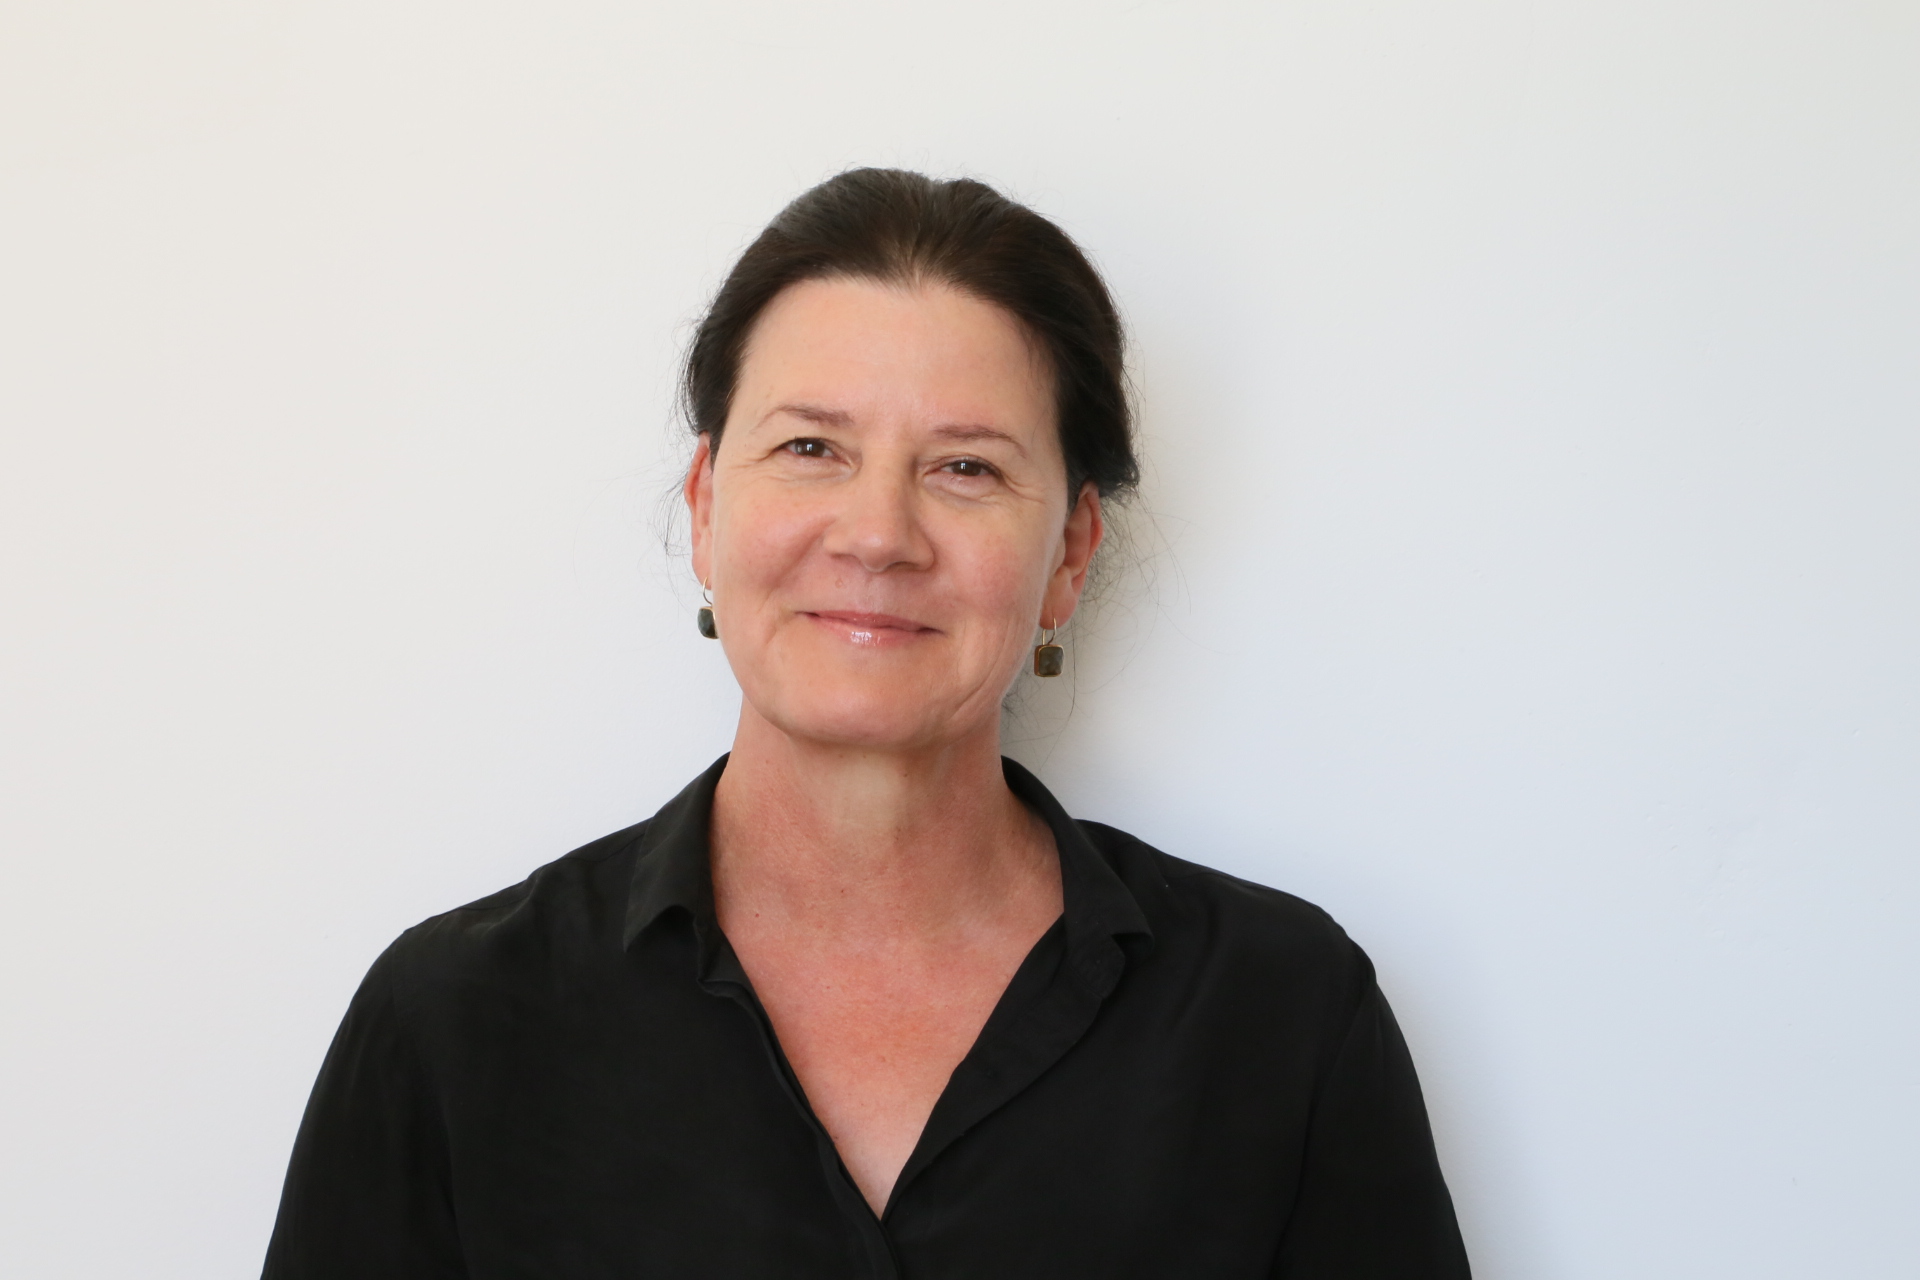 Headshot image of Alison Mears, AIA, Assoc. Professor, Director/Co-Founder, Healthy Materials Lab, Parsons School of Design